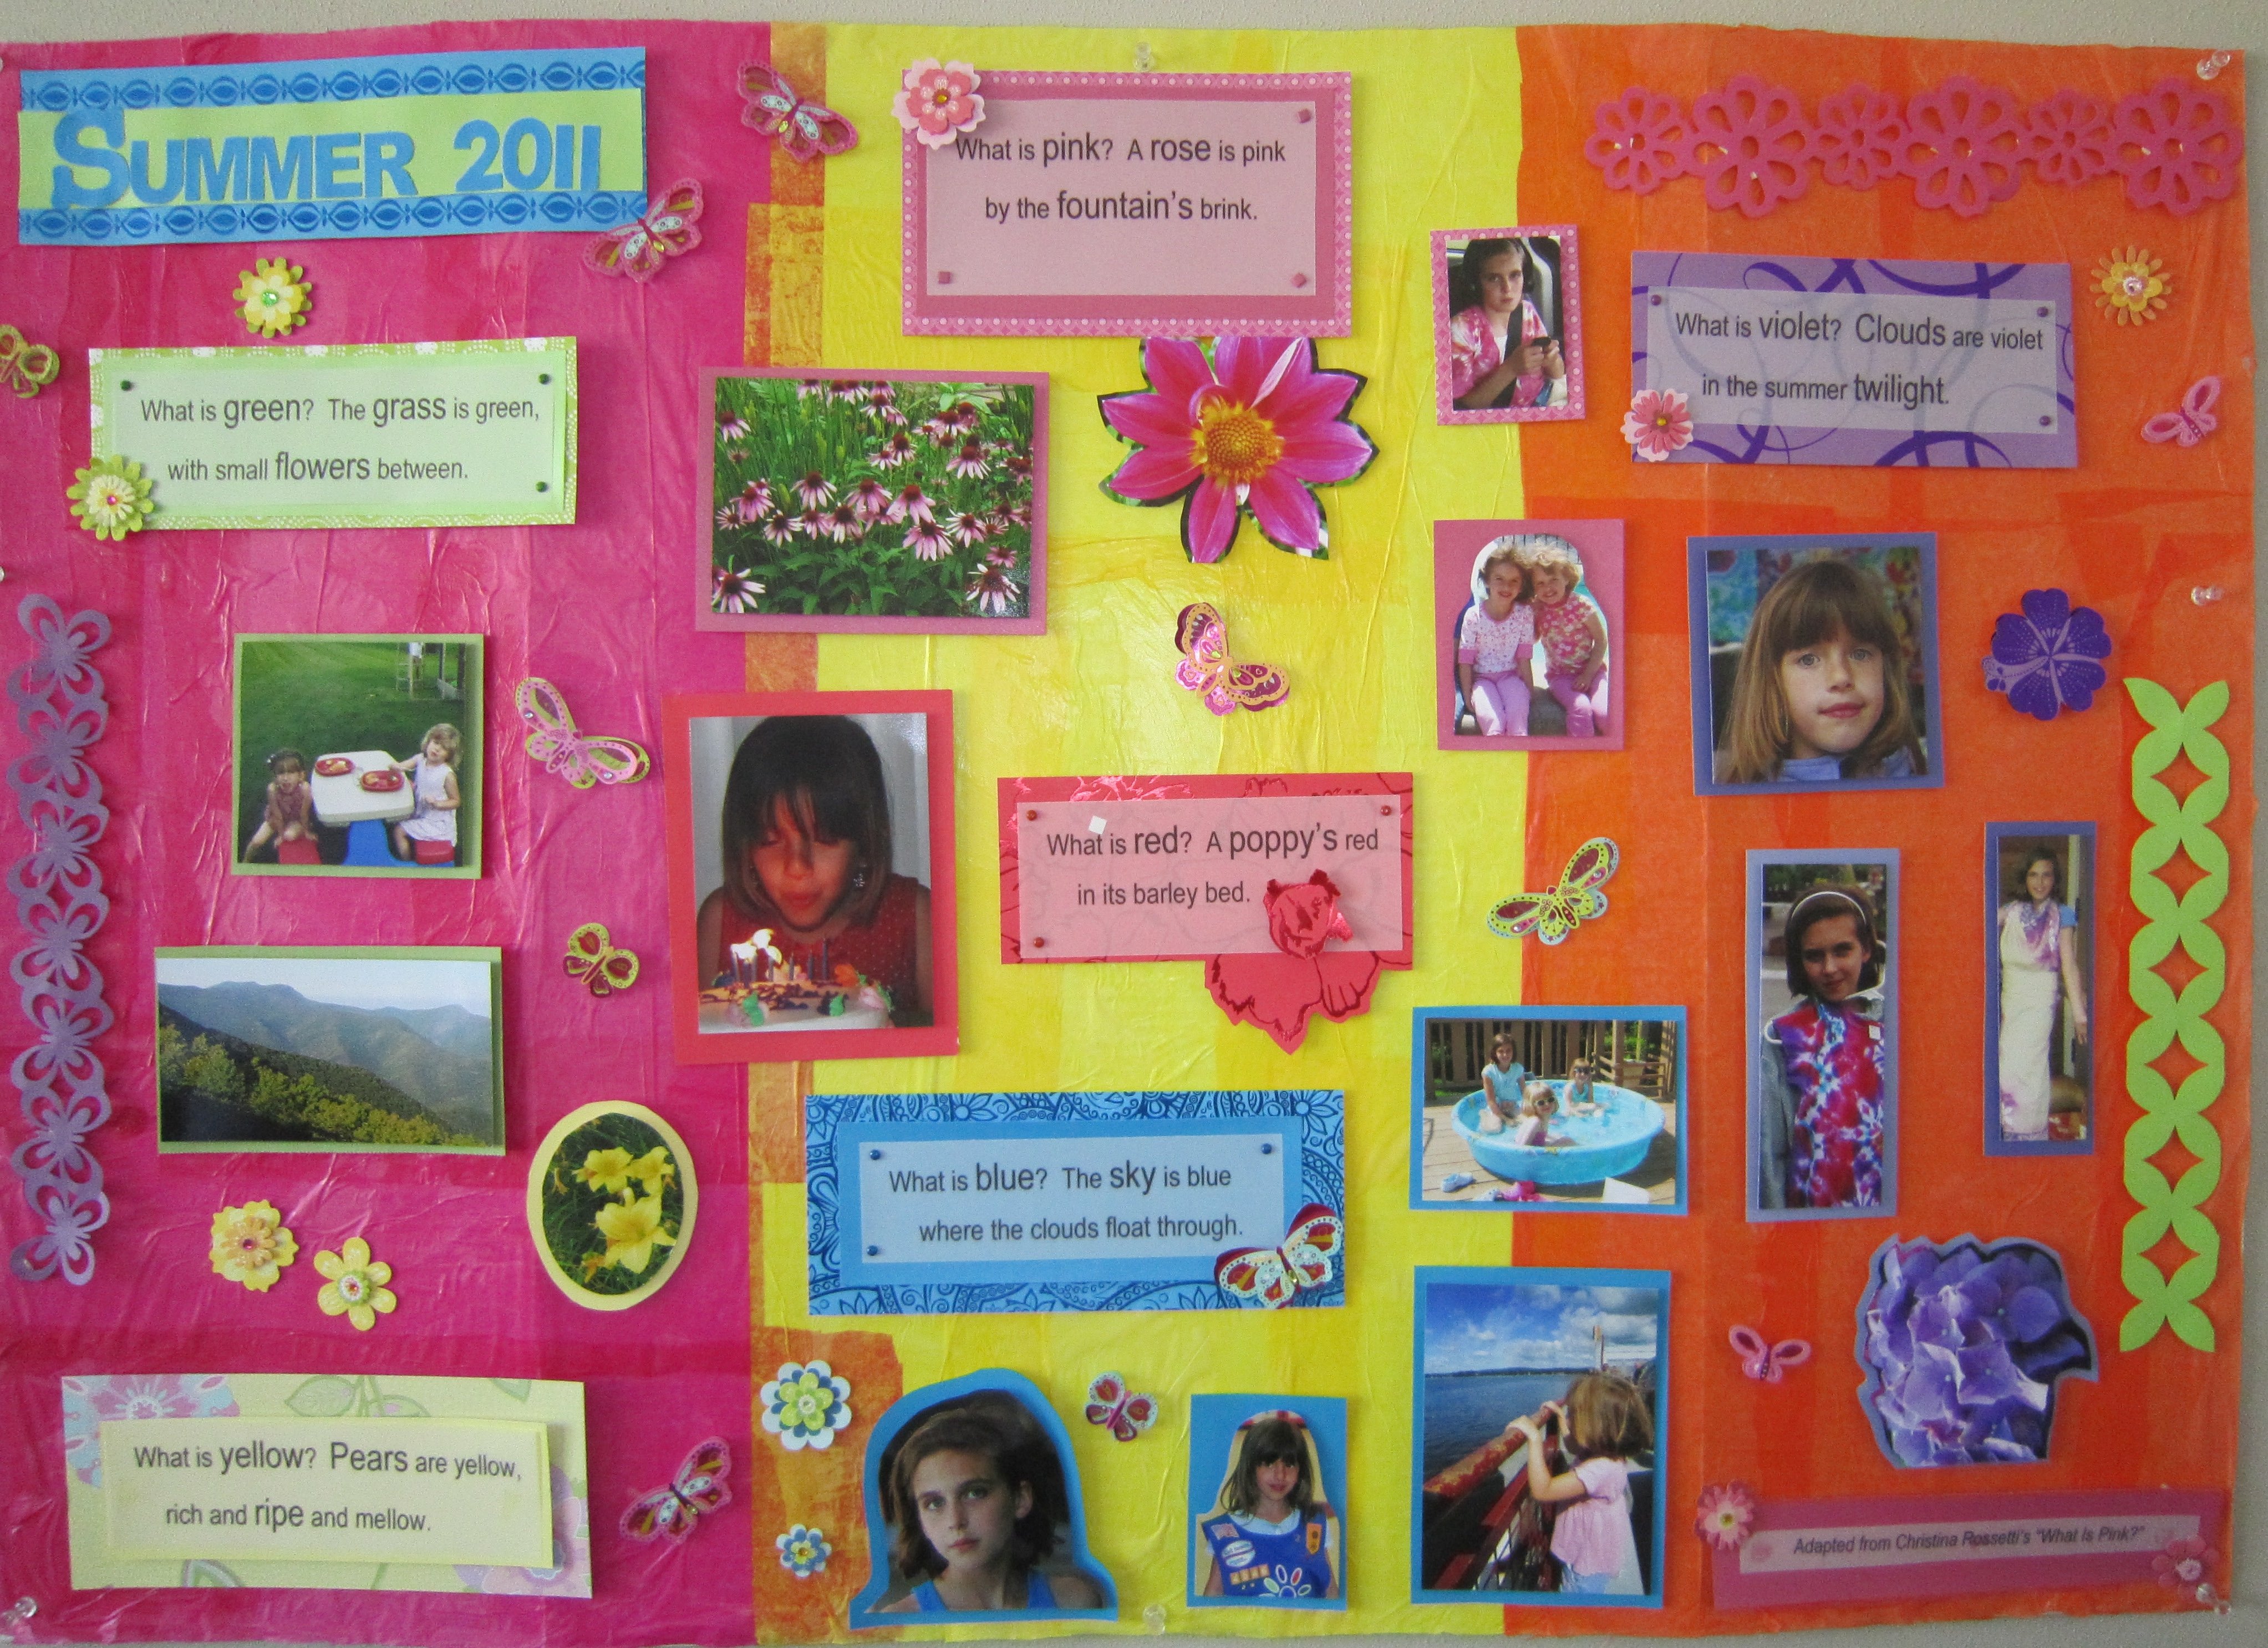 10 Famous Science Project Display Board Ideas tri fold display board design ideas school science fair marvellous 2022